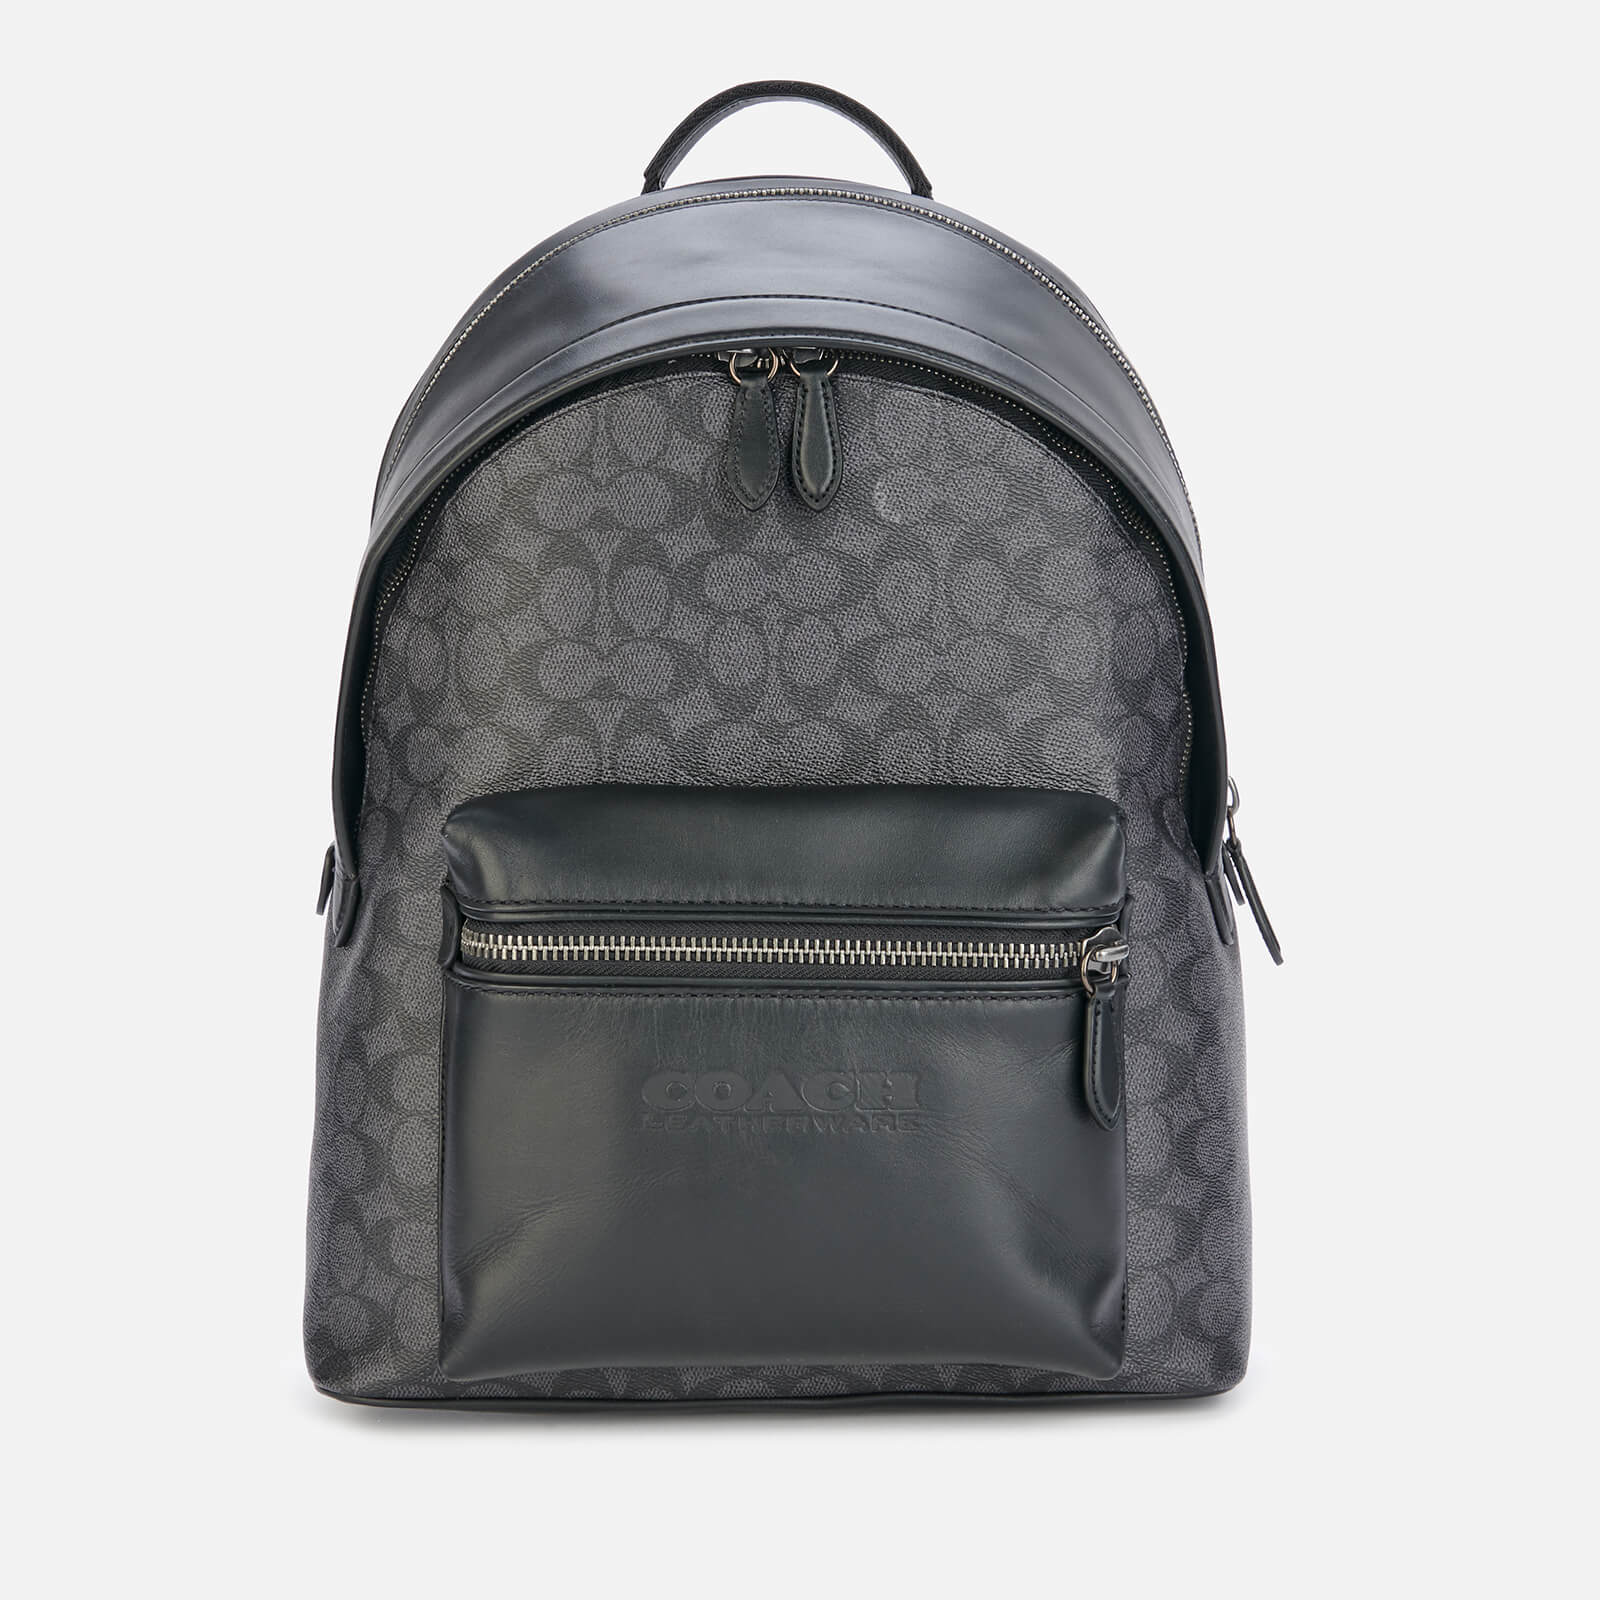 Coach Men's Signature Charter Backpack - Charcoal